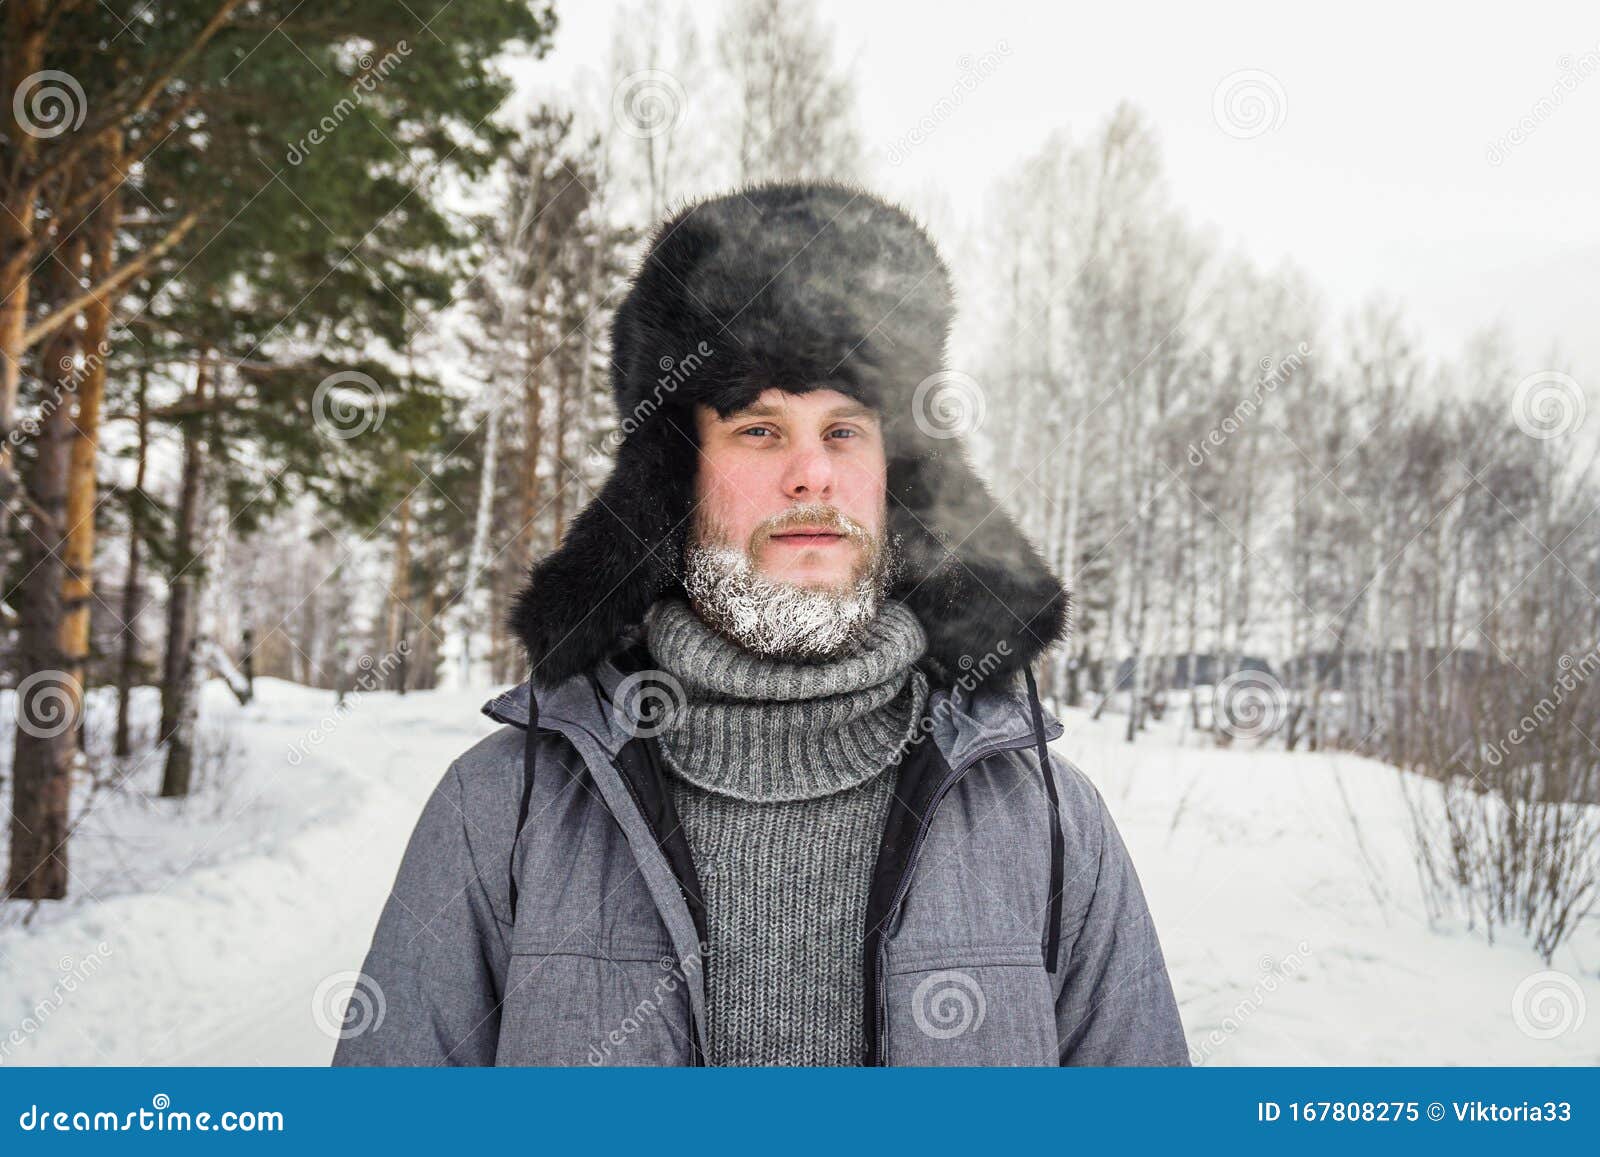 siberian russian man with a beard in hoarfrost in freezing cold in the winter freezes and wears a hat with a earflap